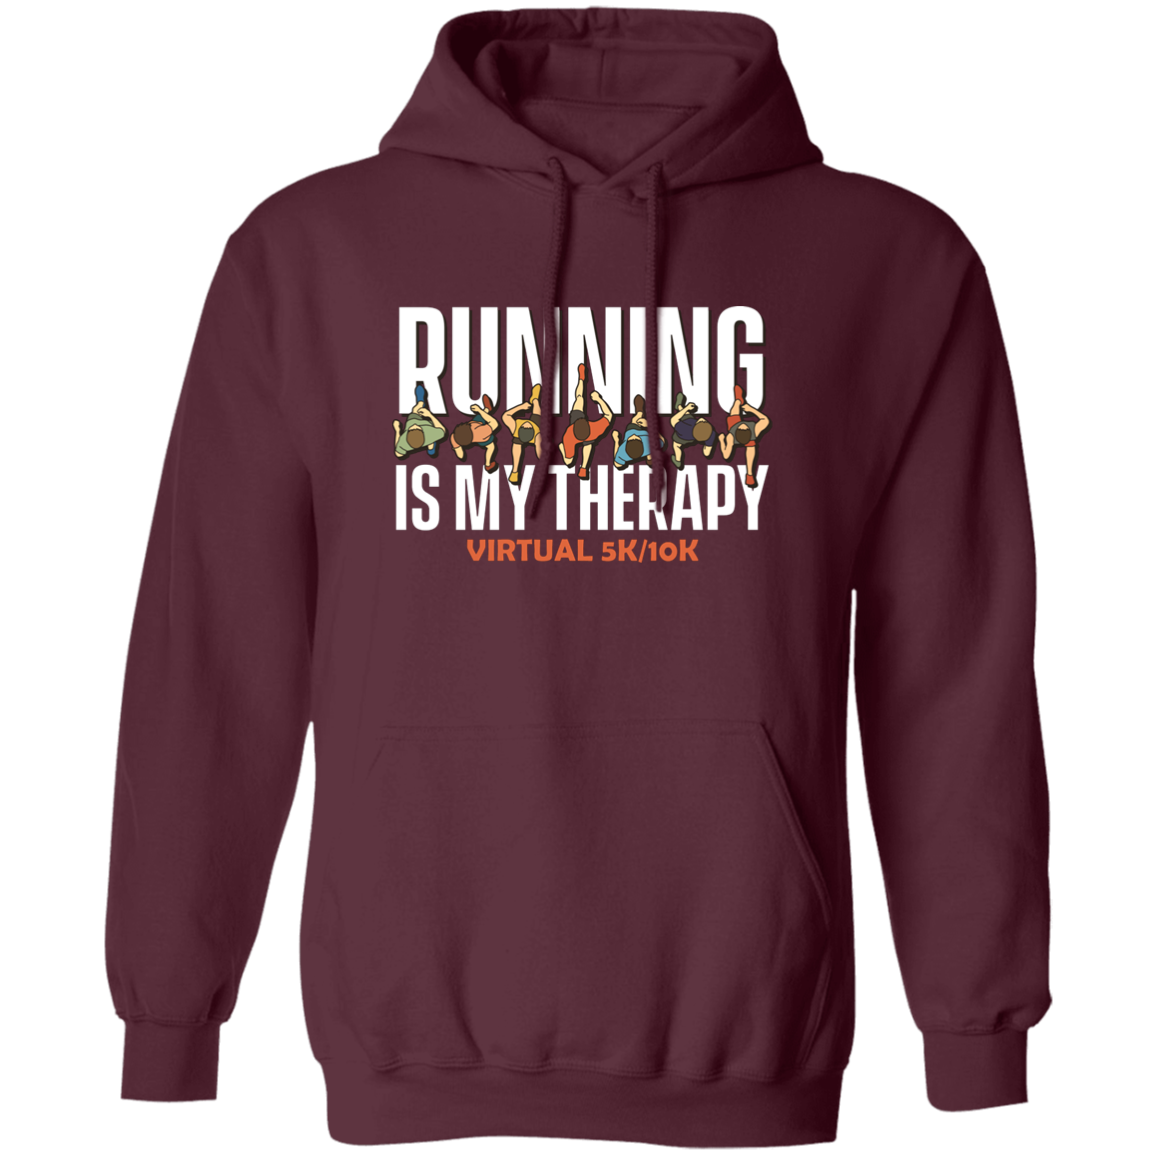 THERAPY-2 running is my therapy hoody